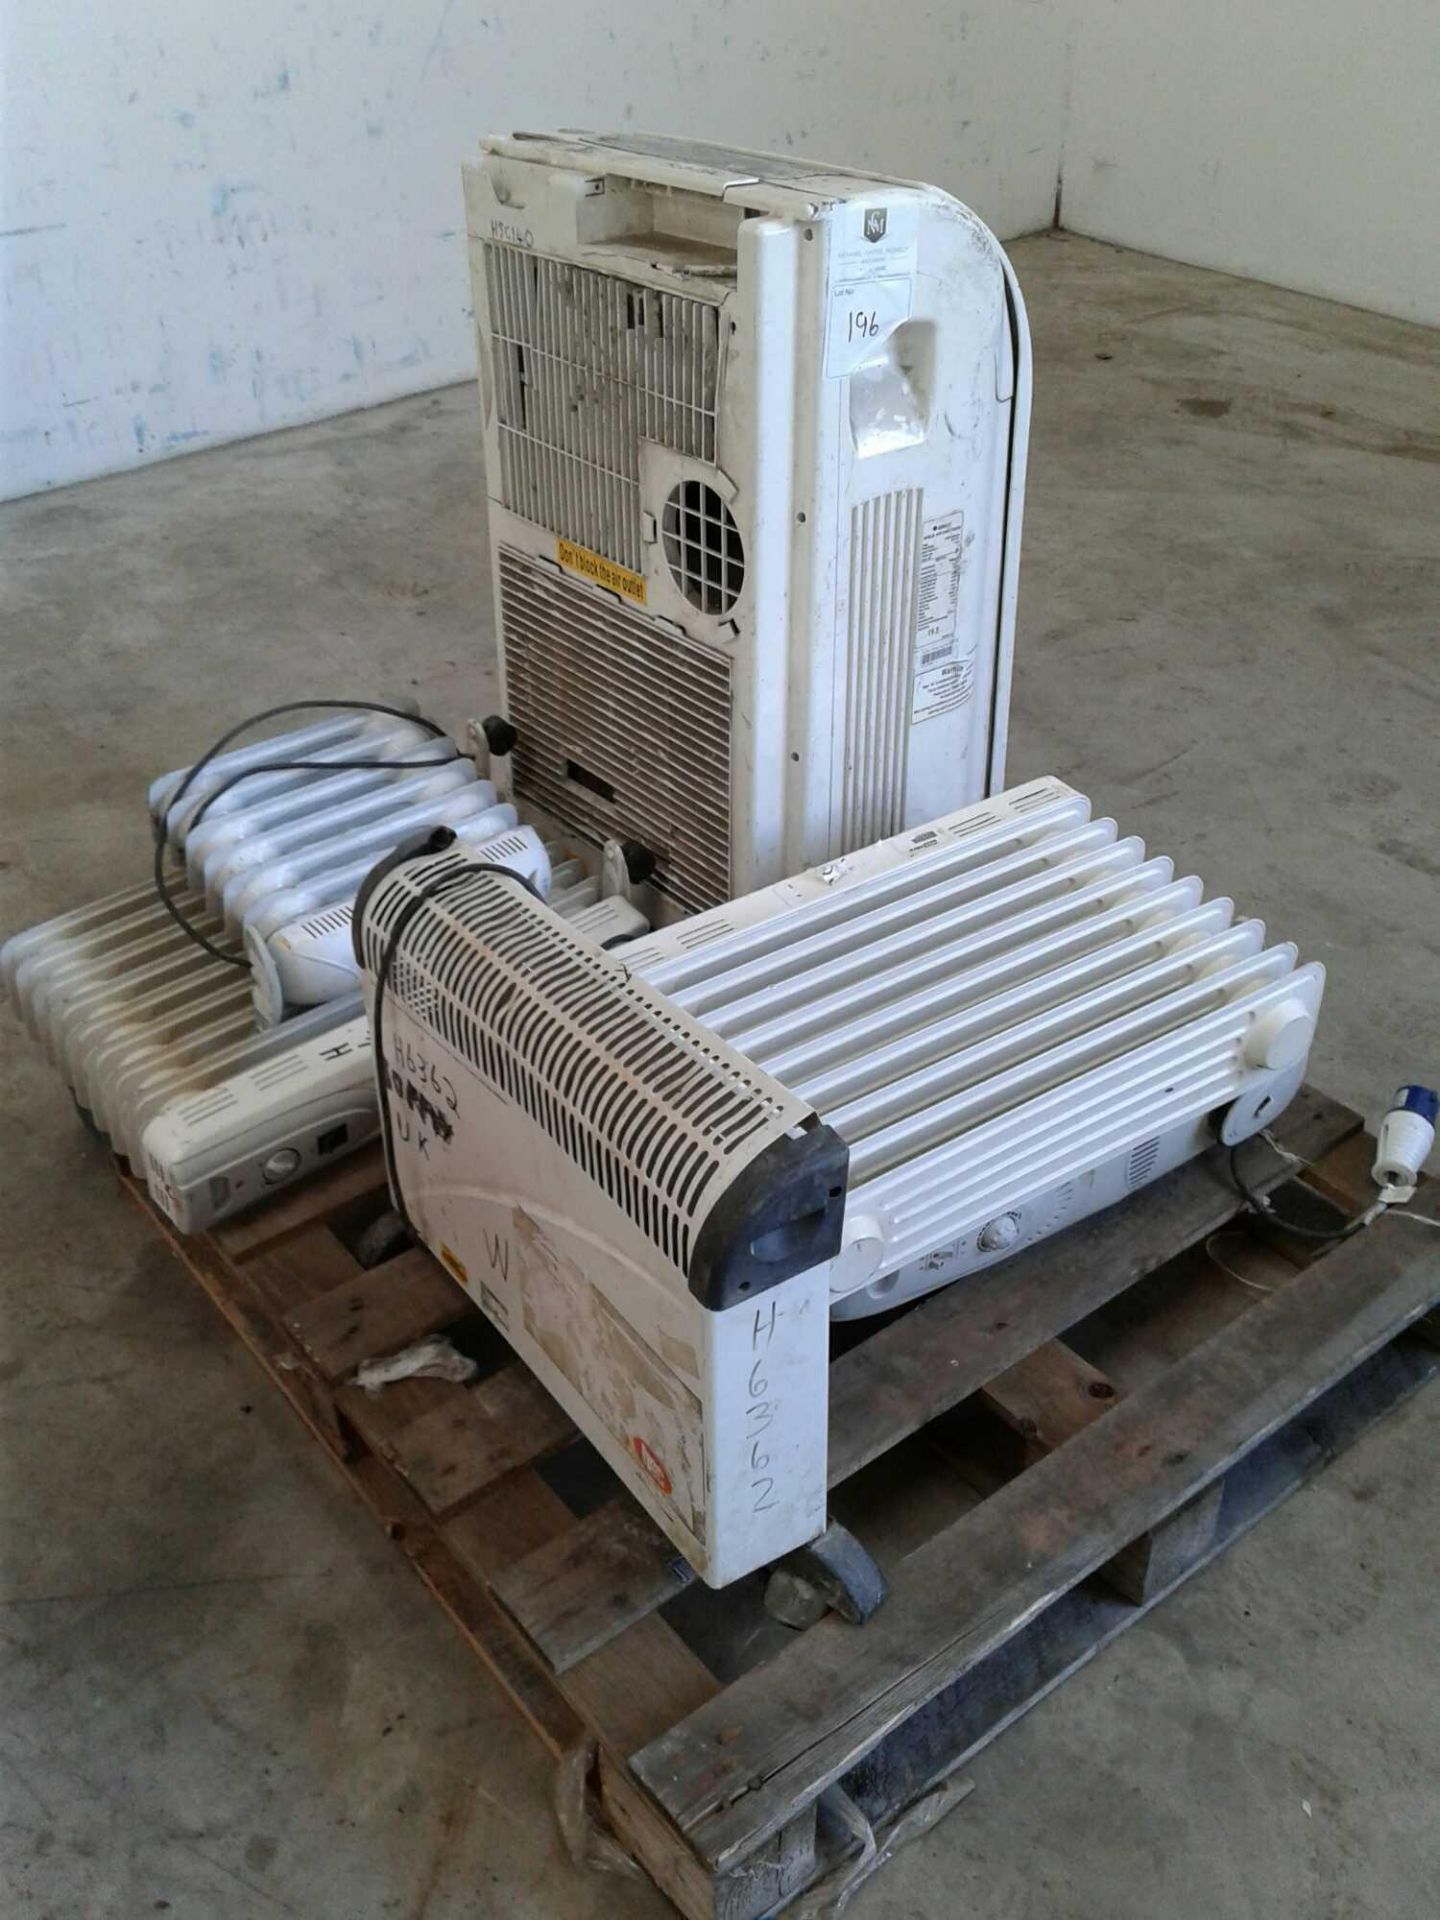 5 x various heaters 1x air conditioning unit